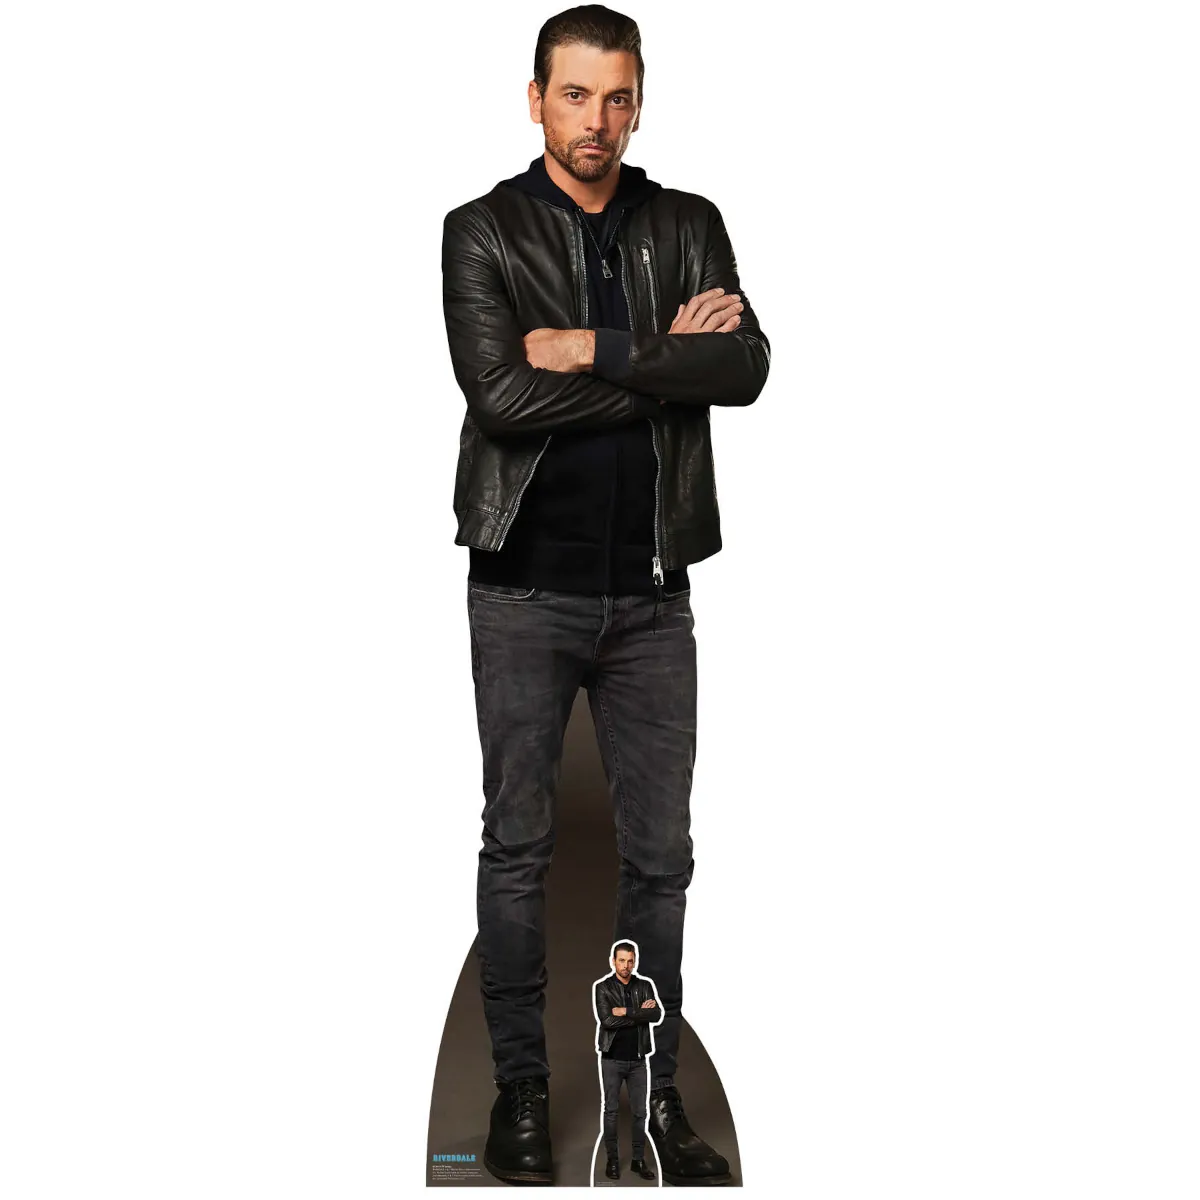 SC4151 F. P. Jones 'Leather Jacket' (Riverdale) Official Lifesize + Mini Cardboard Cutout Standee Front